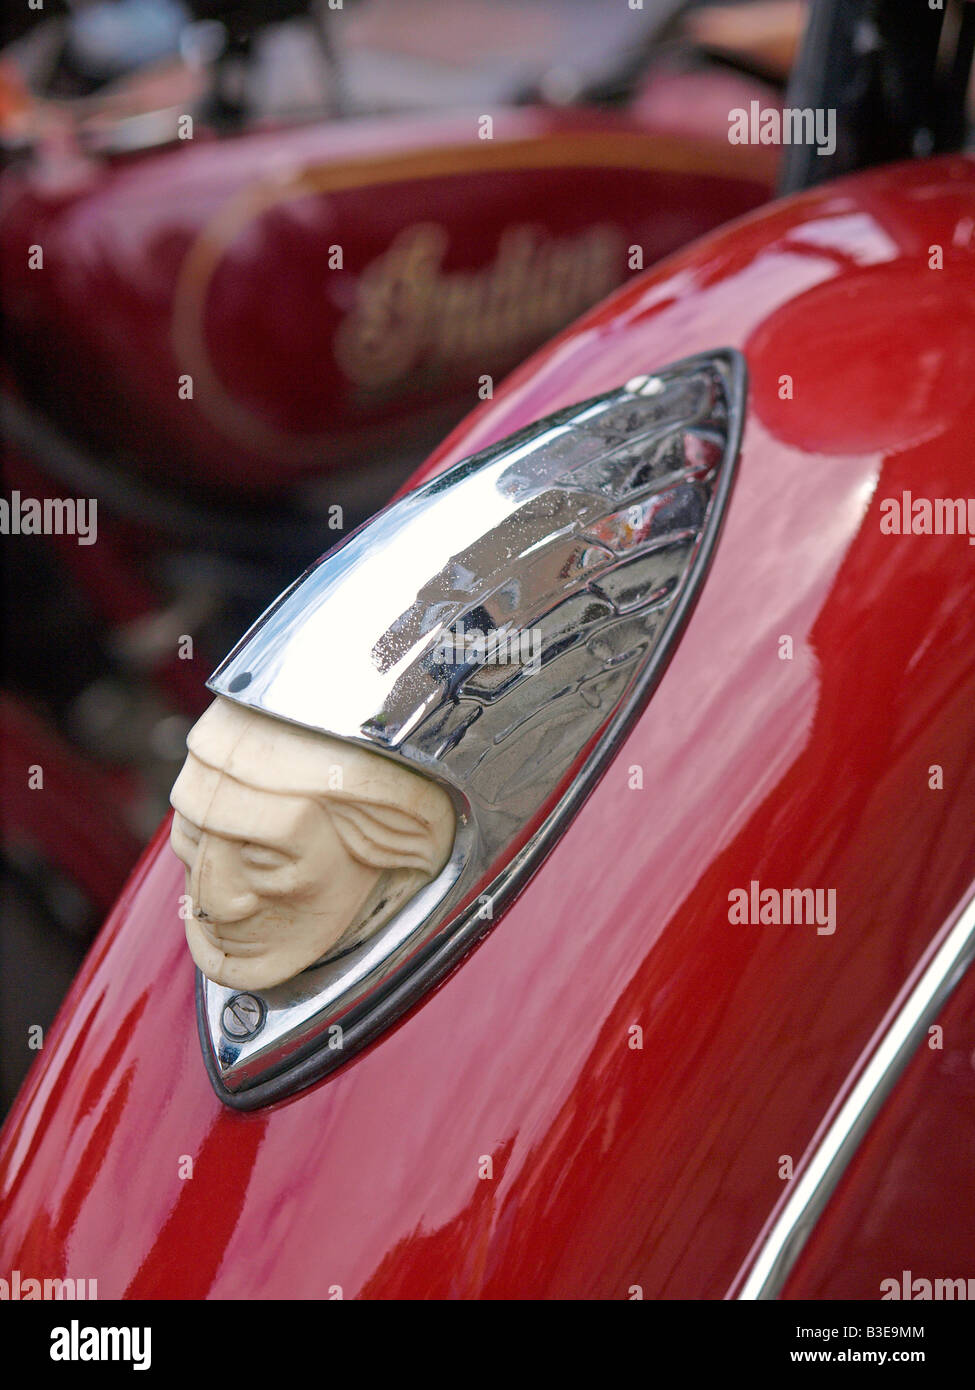 Vintage Indian motorcycles have a position light on the front fender in the shape of an Indian head Stock Photo